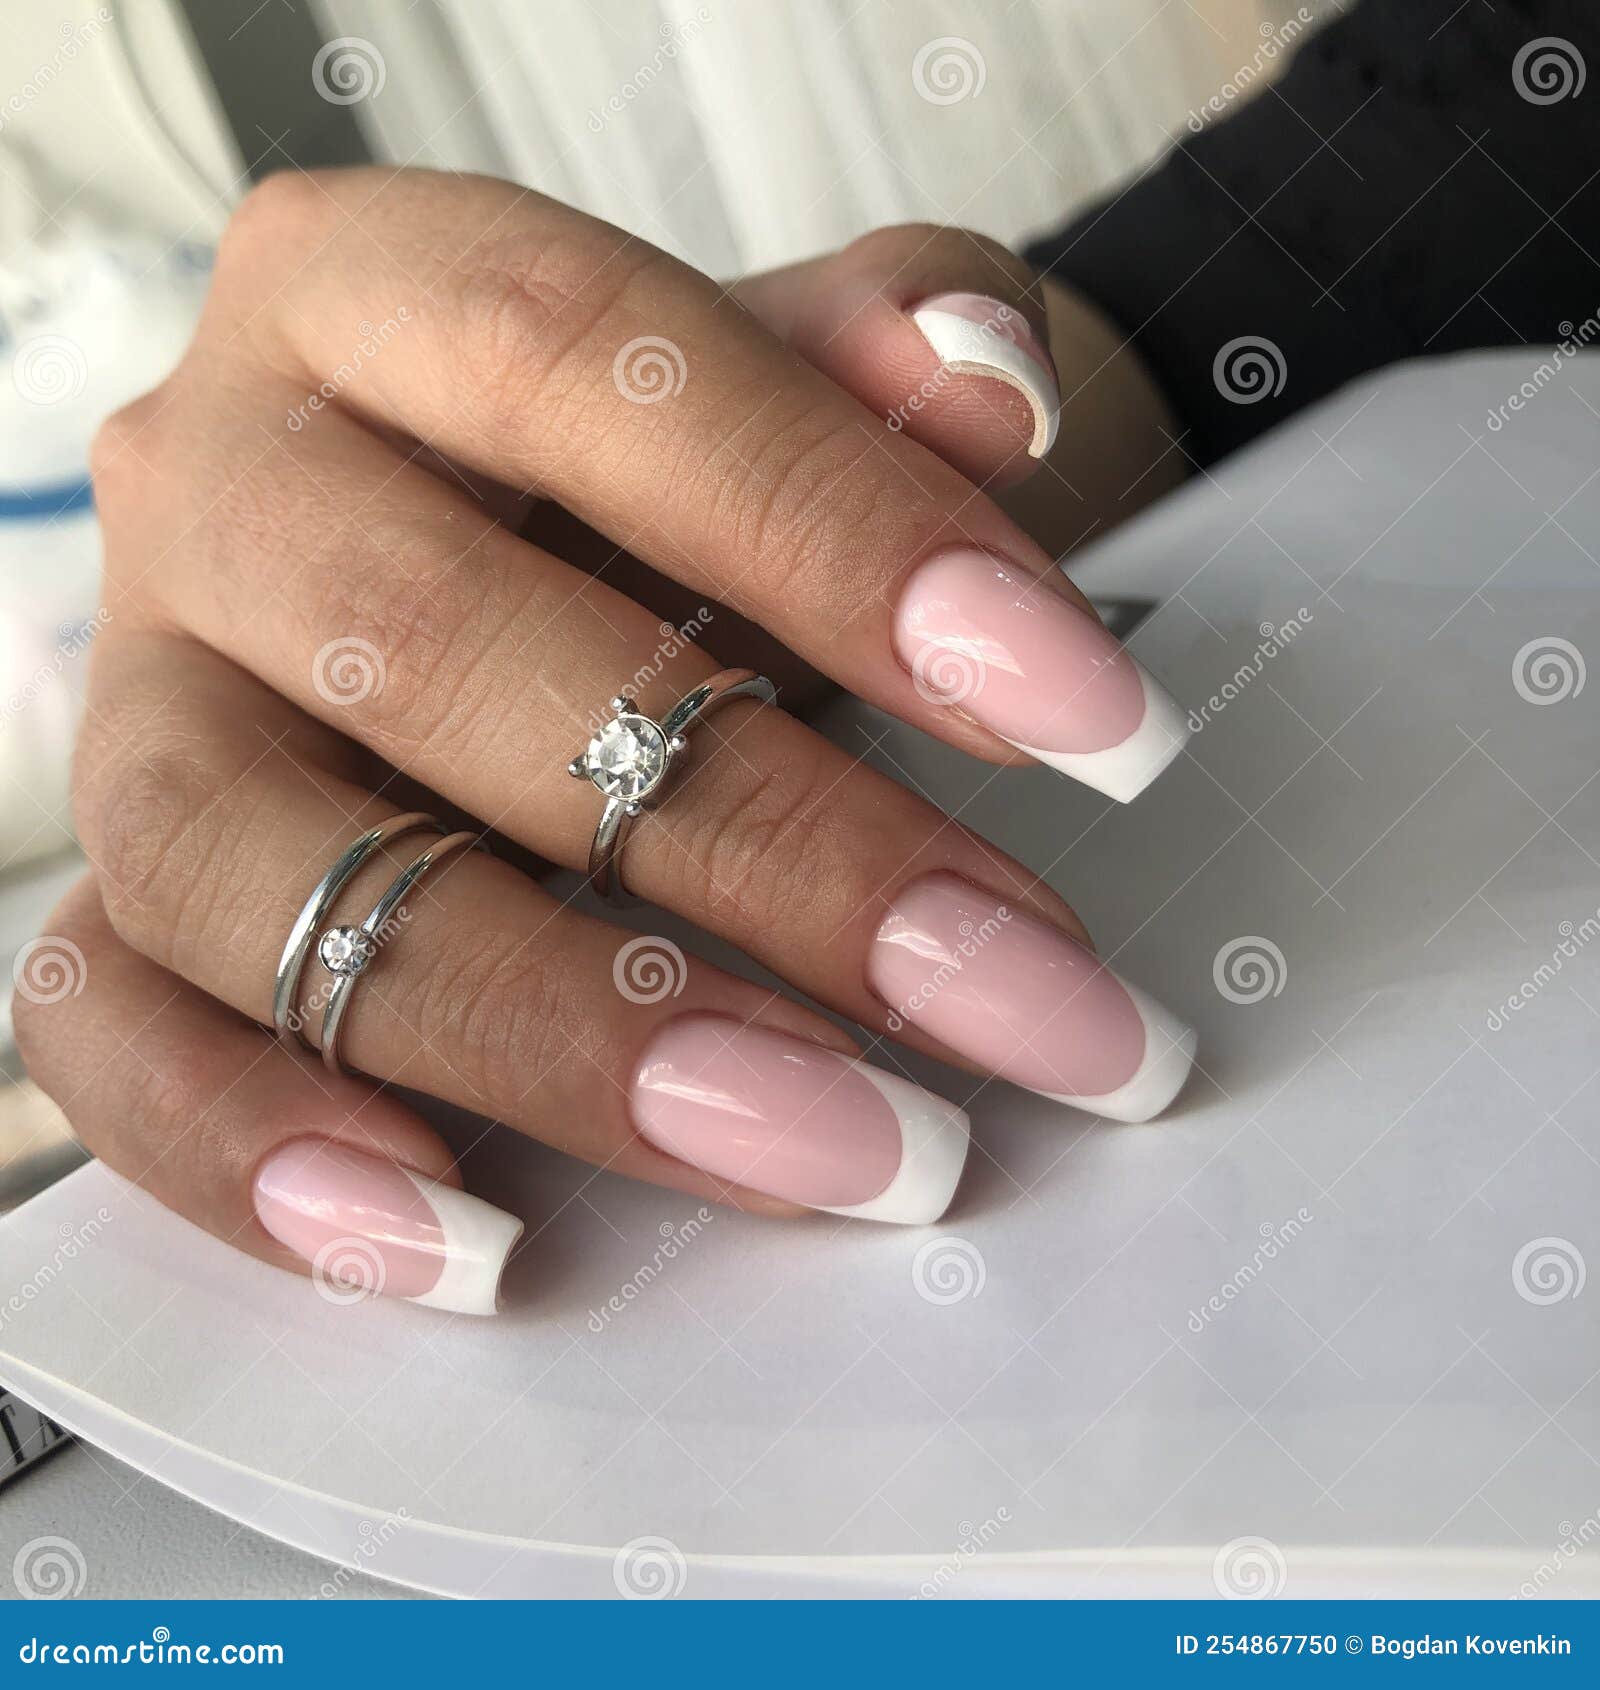 French Manicure on the Nails. French Manicure Design. Manicure Gel Nail  Polish Stock Photo - Image of concept, clean: 254867750